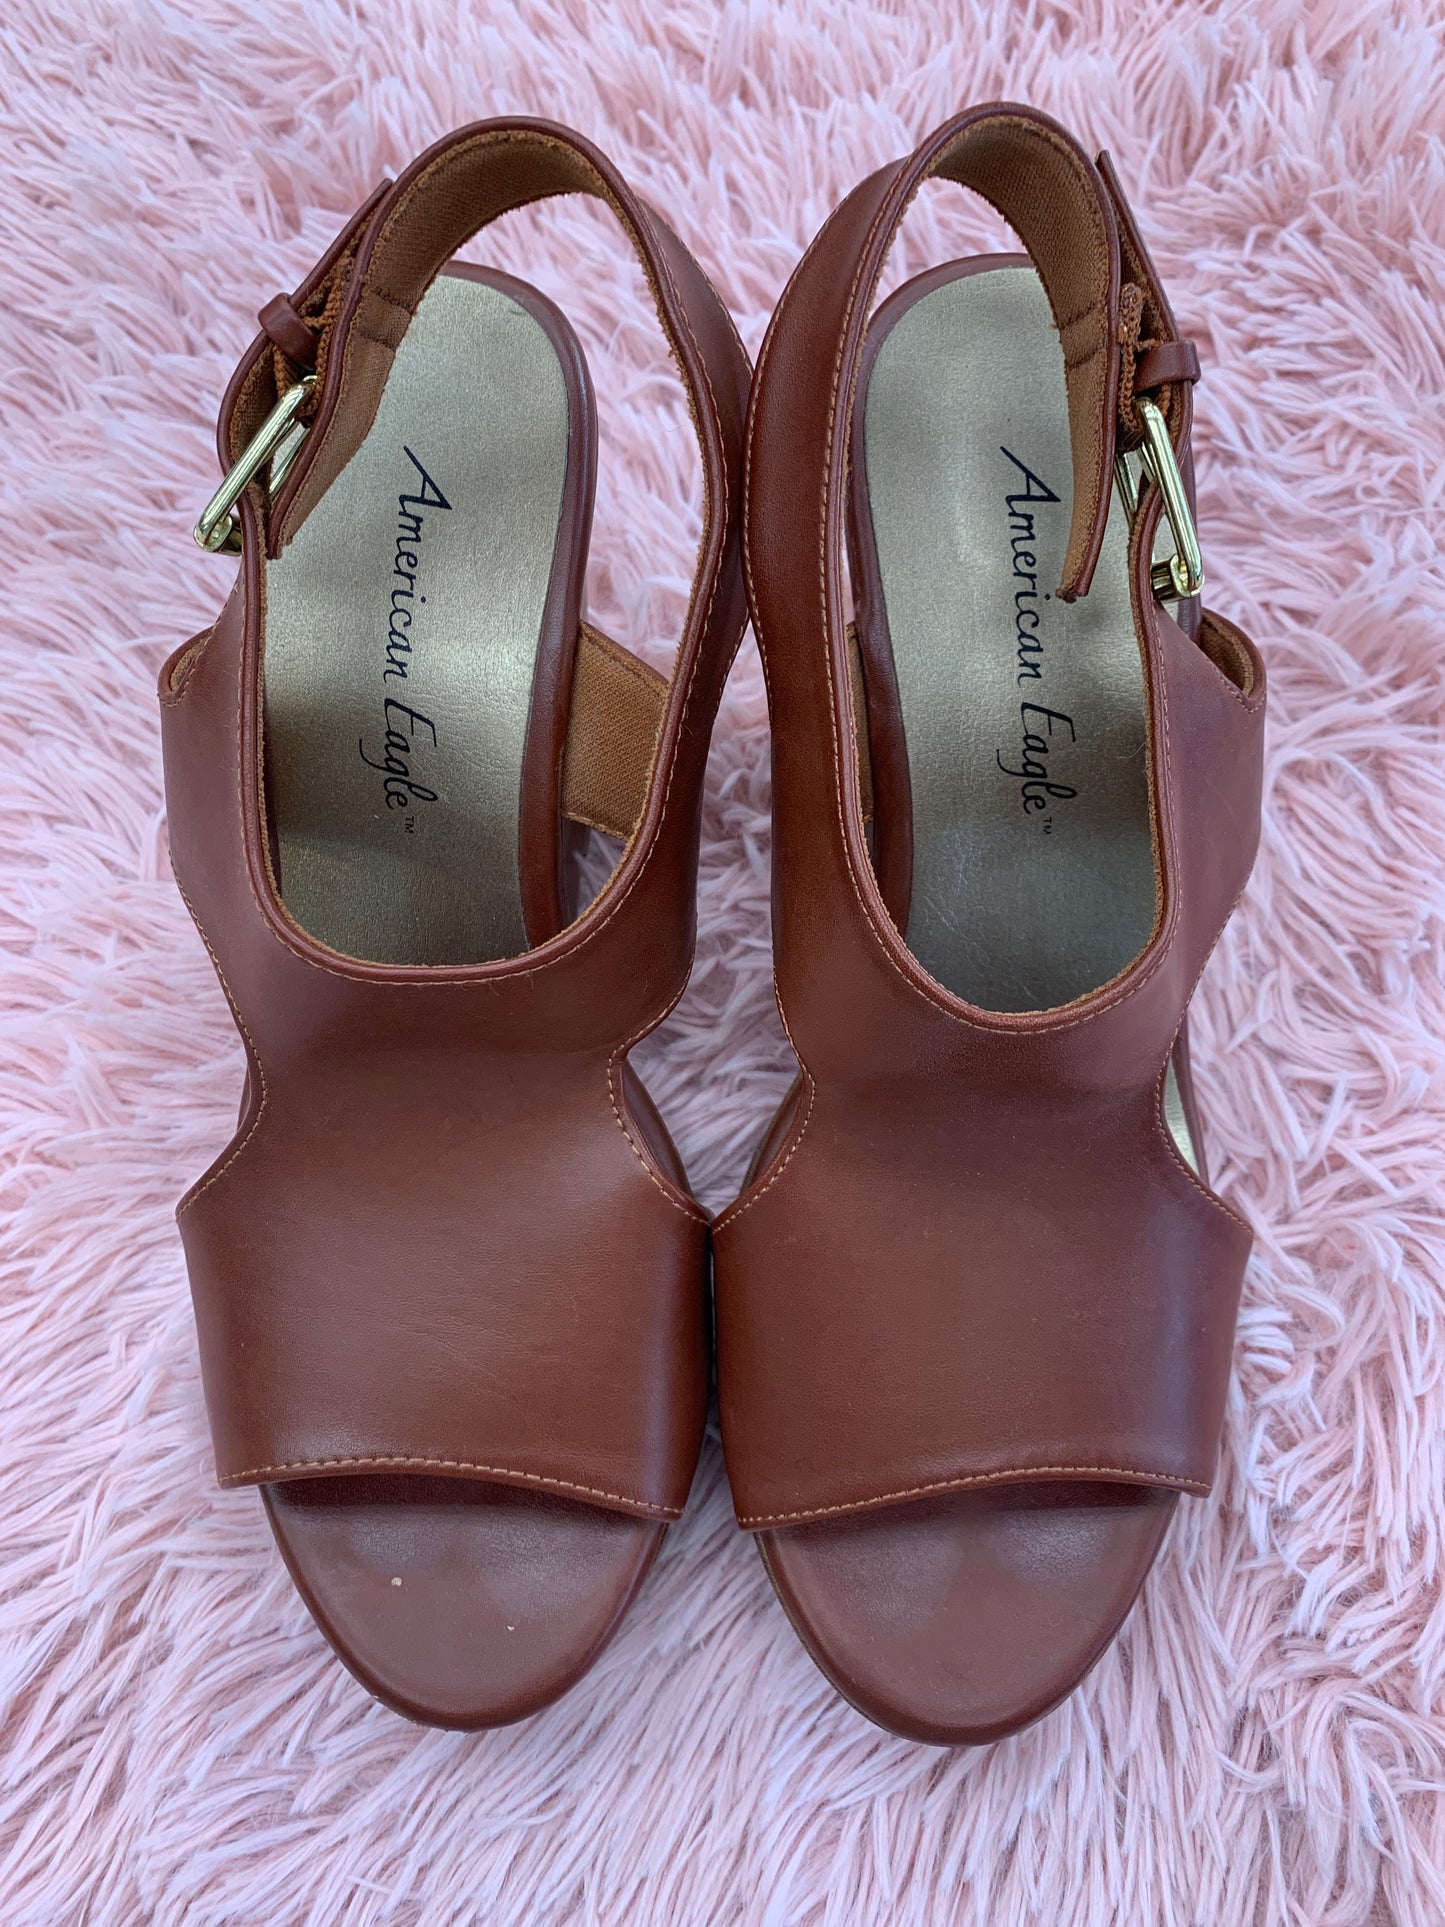 Shoes Heels Wedge By American Eagle  Size: 8.5